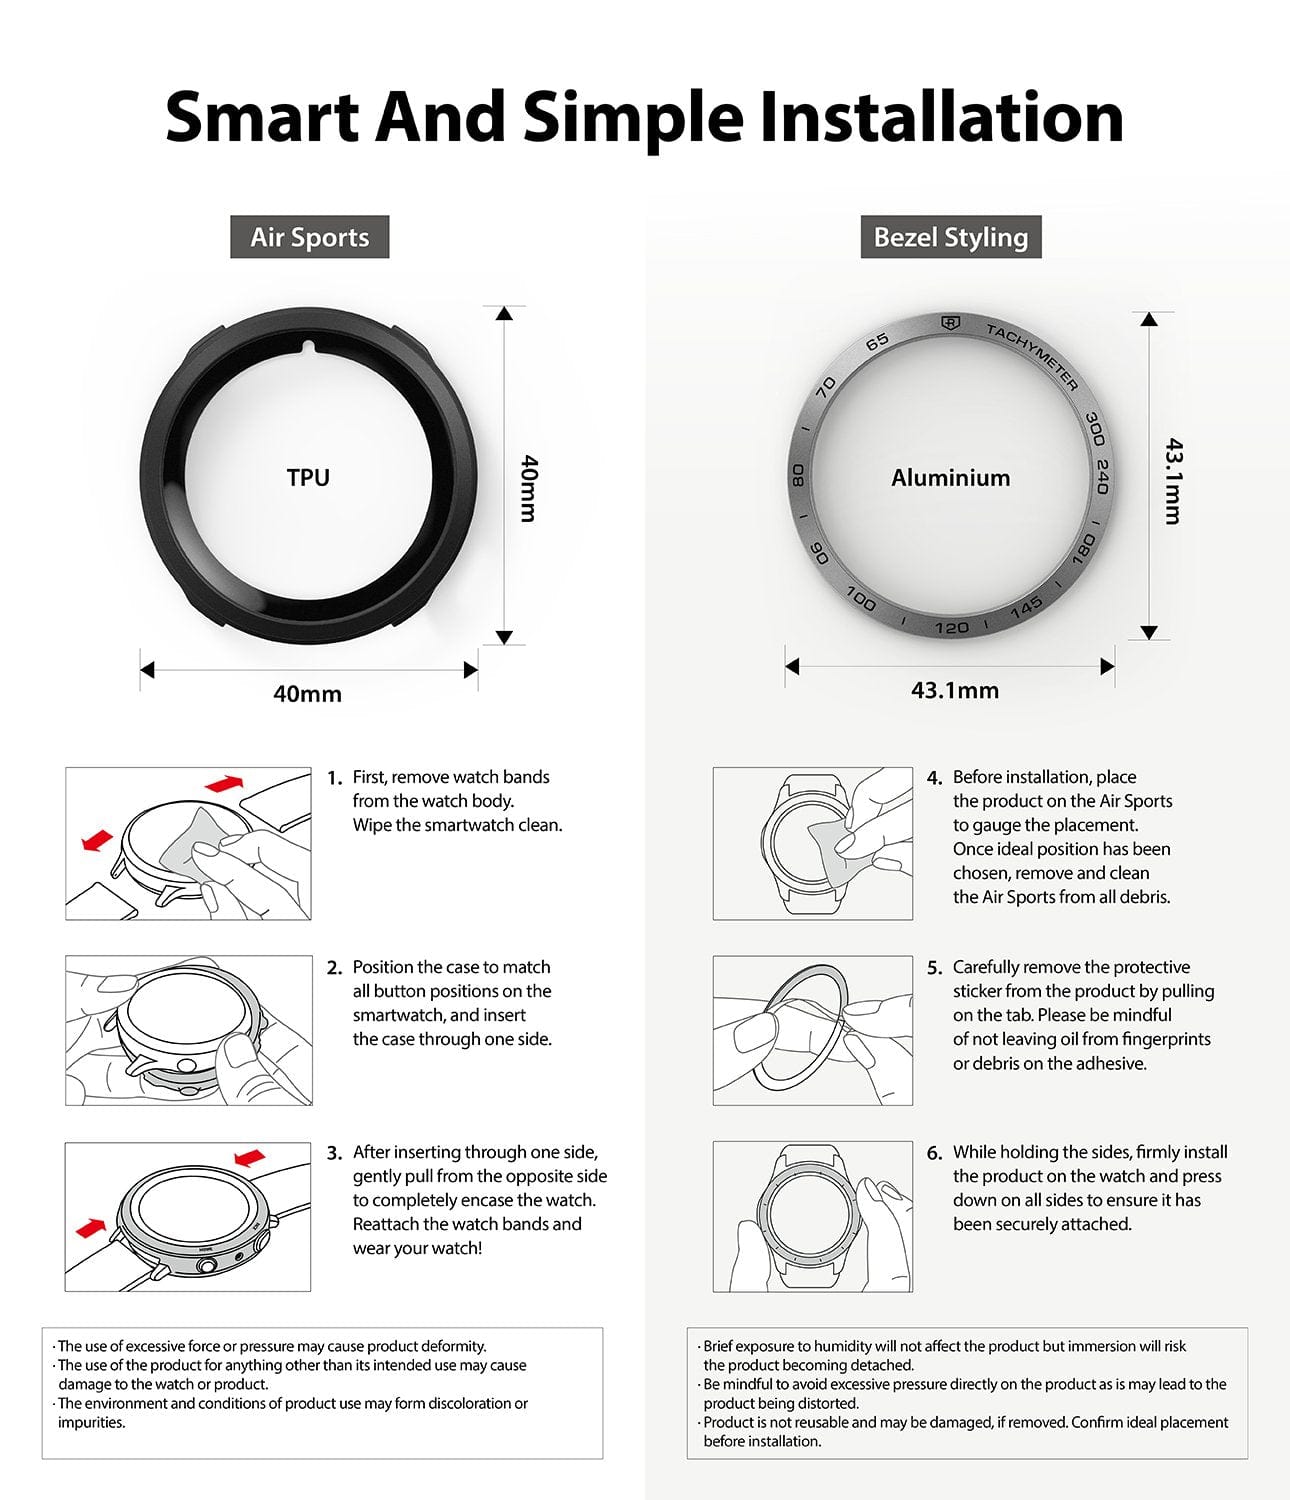 Enjoy a smart and simple installation process with our Air Sports + Bezel Styling combo for the Galaxy Watch 4